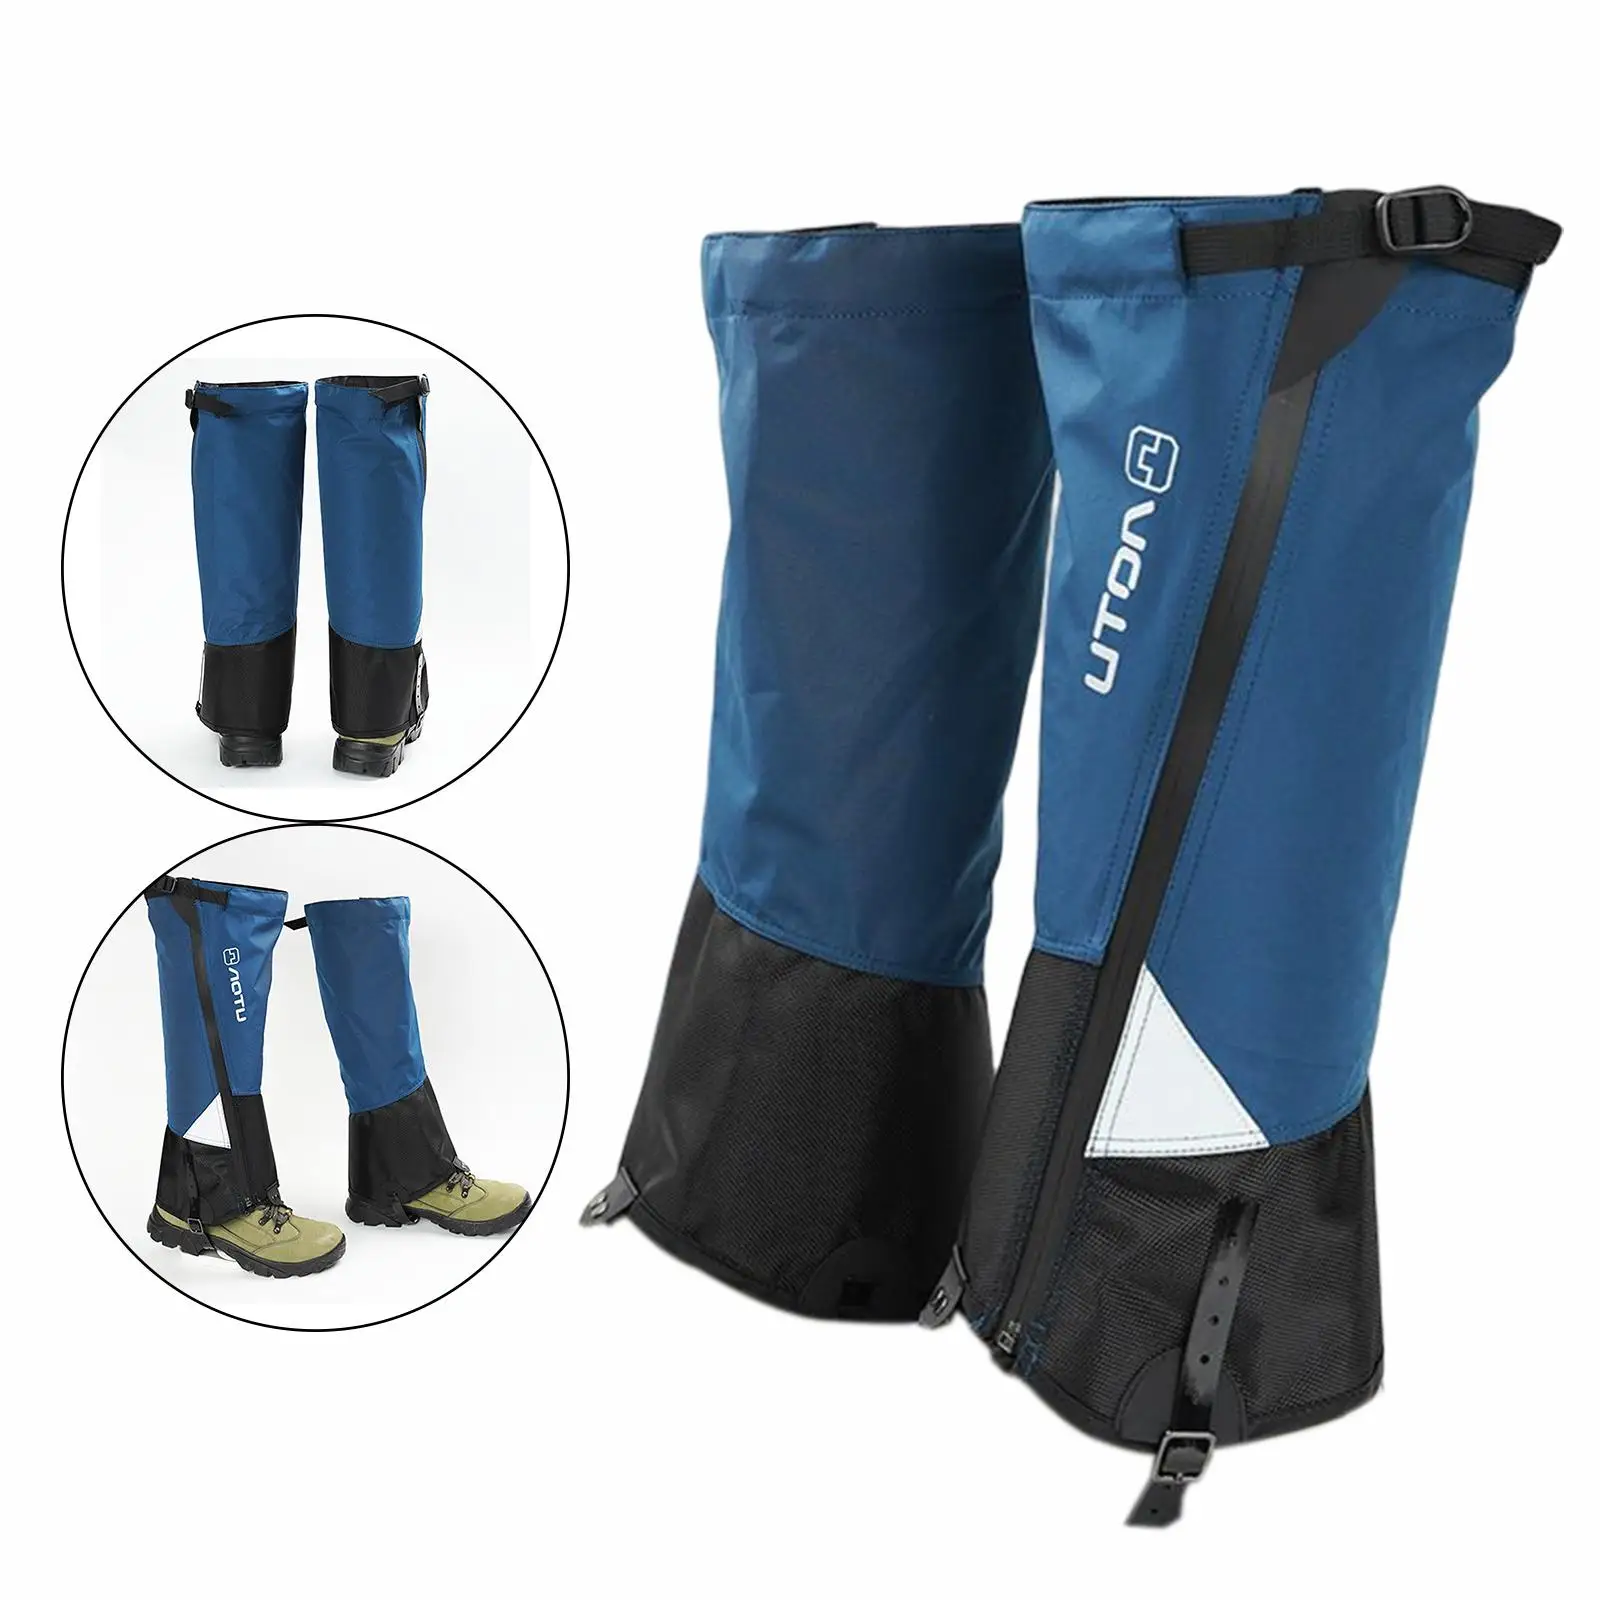 Adjustable Leg Gaiters Waterproof Durable Shoes Covers for Hiking Outdoor Sports